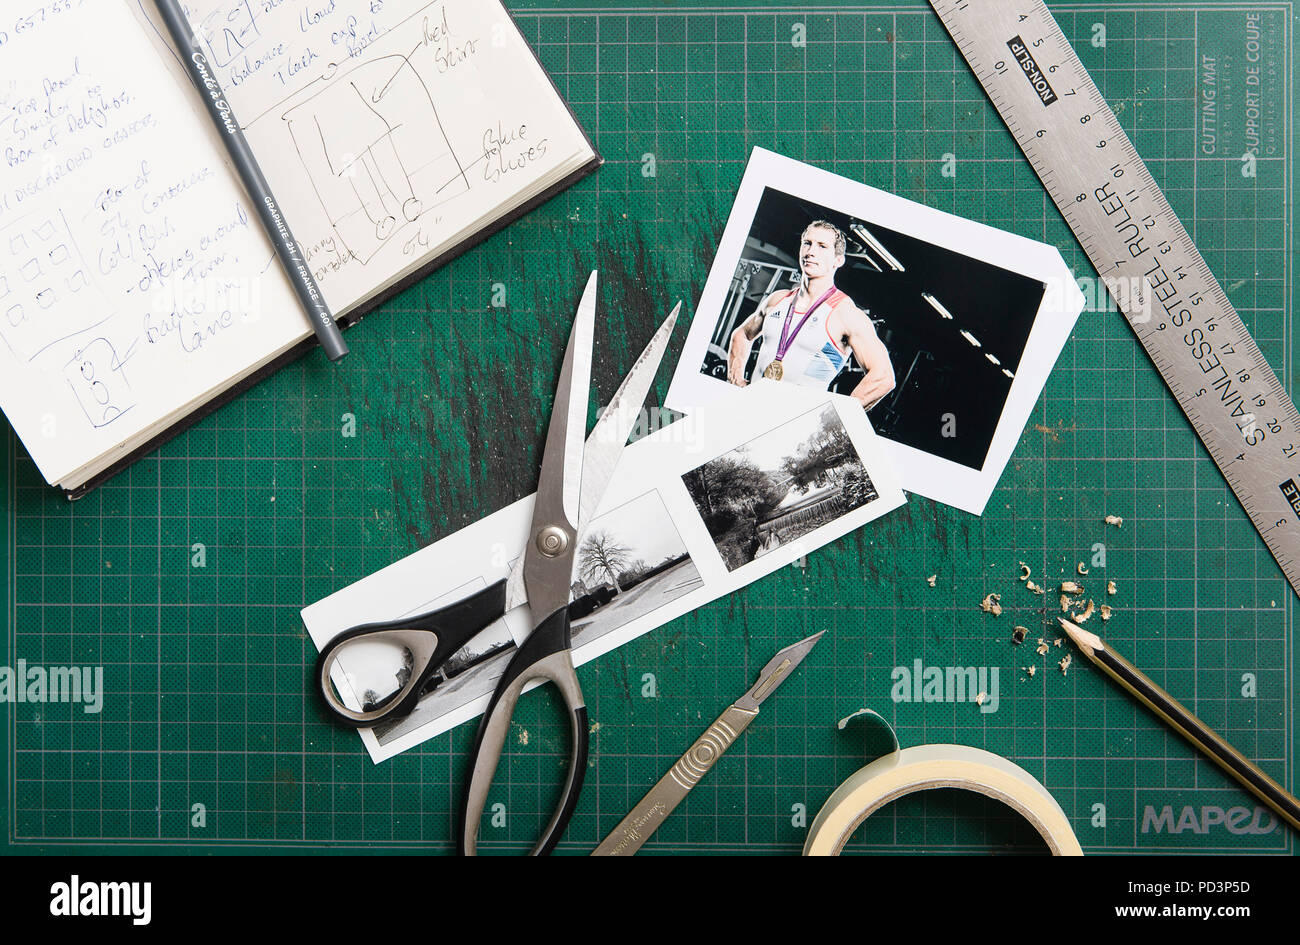 Top down view of cutting mat with sketchbook, scissors, tape, ruler, prints and pencil. Stock Photo